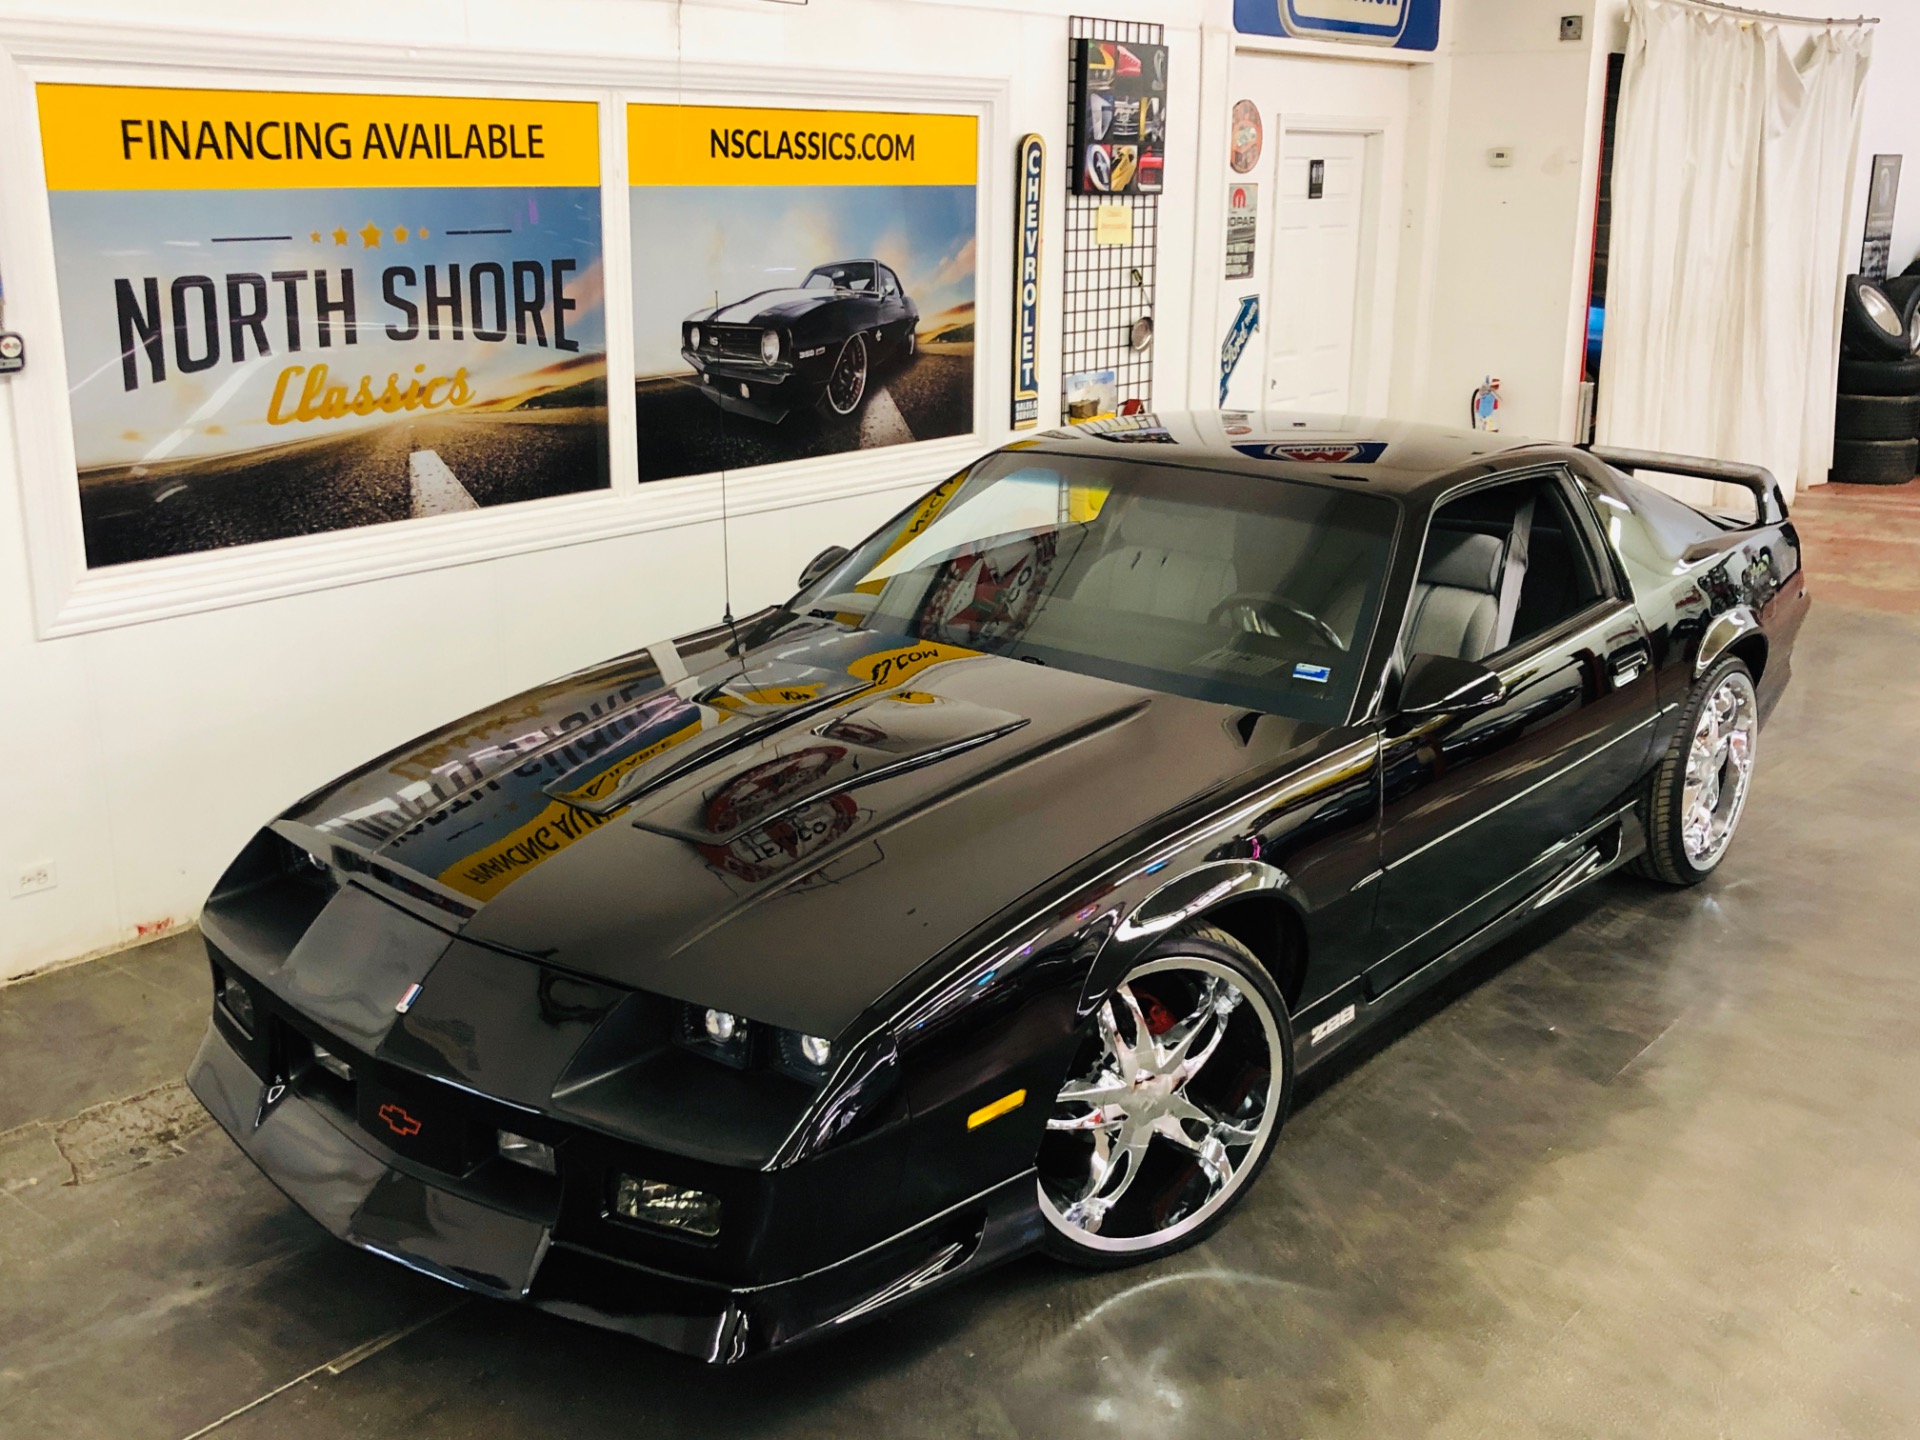 Used 1992 Chevrolet Camaro - Z/28 - 25TH ANNIVERSARY - SHOW QUALITY PAINT -  LOW MILES - SEE VIDEO For Sale (Sold) | North Shore Classics Stock #92952NSC